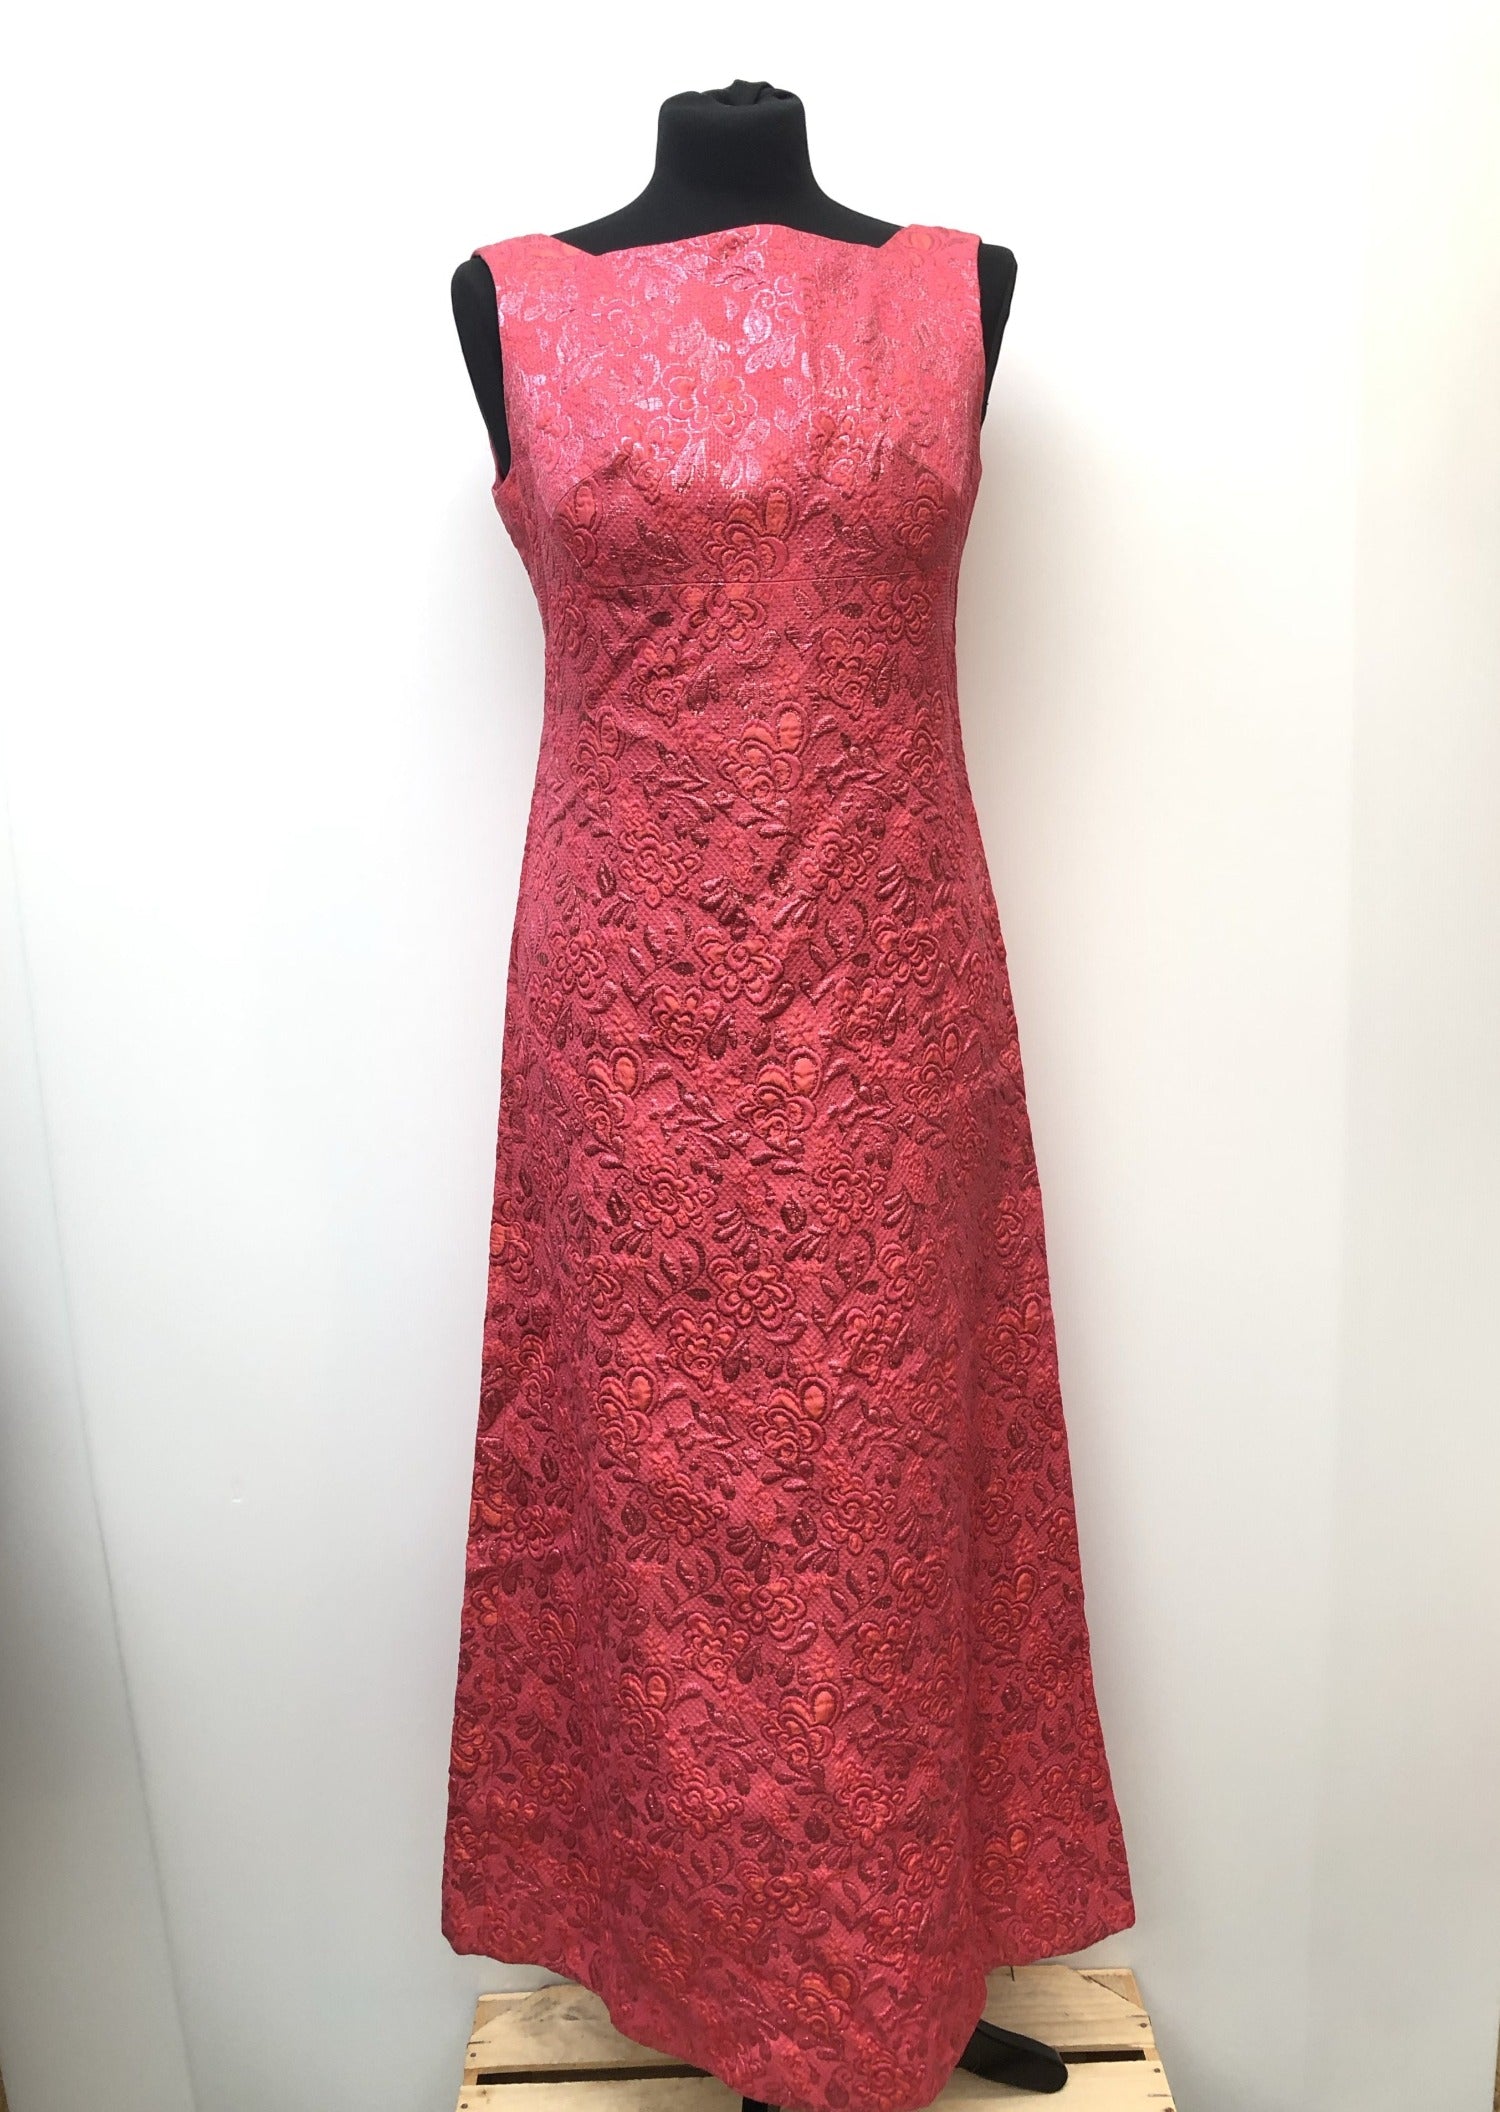 womens  vintage  Urban Village Vintage  train  square neck  sleeveless  pink  metallic  maxi dress  low back design  long dress  embroidery detail  Embroidered  dress  Blanes  60s  1960s  12